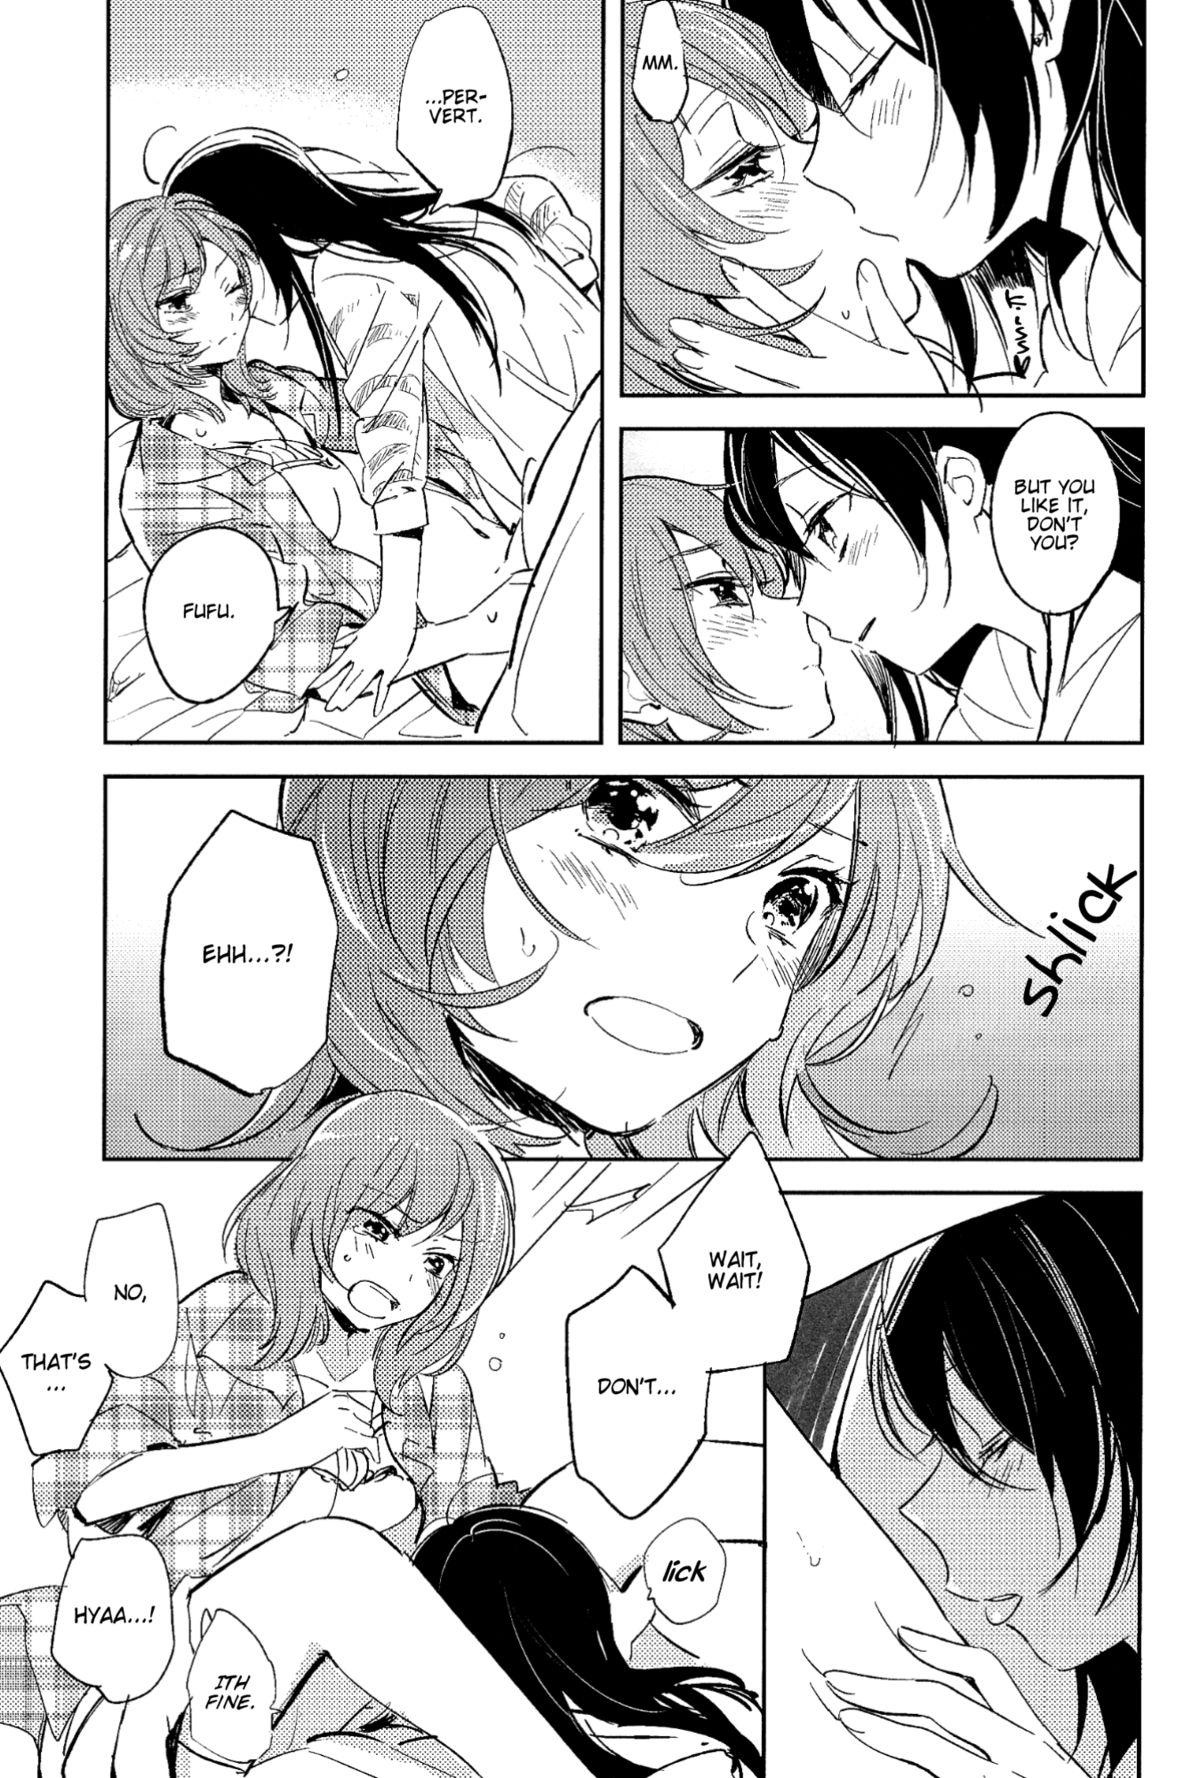 Canadian Koibito no Jikan | Time for Lovers - Love live With - Page 11